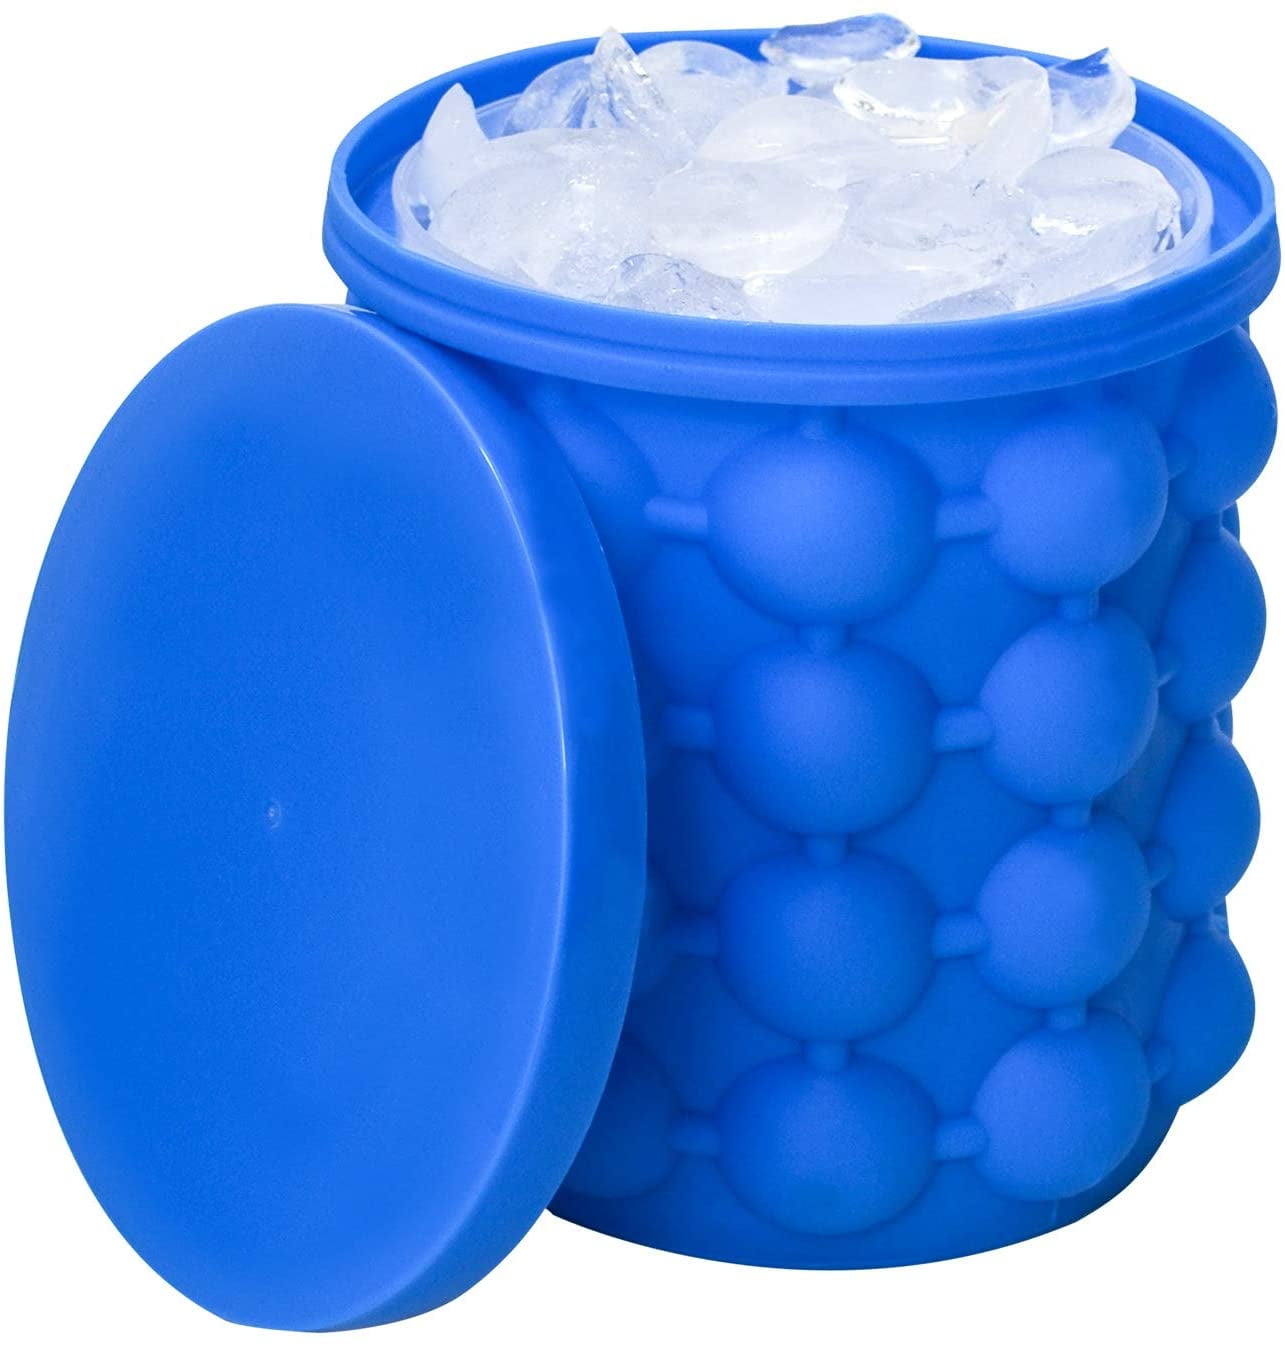 UOYOTT Large Silicone Ice Bucket Ice Cube Maker,Silicone Ice Cube Maker  Cup,Easy-Release Ice Lattice,Portable Ice Trays for Freezer Cocktail,  Coffee